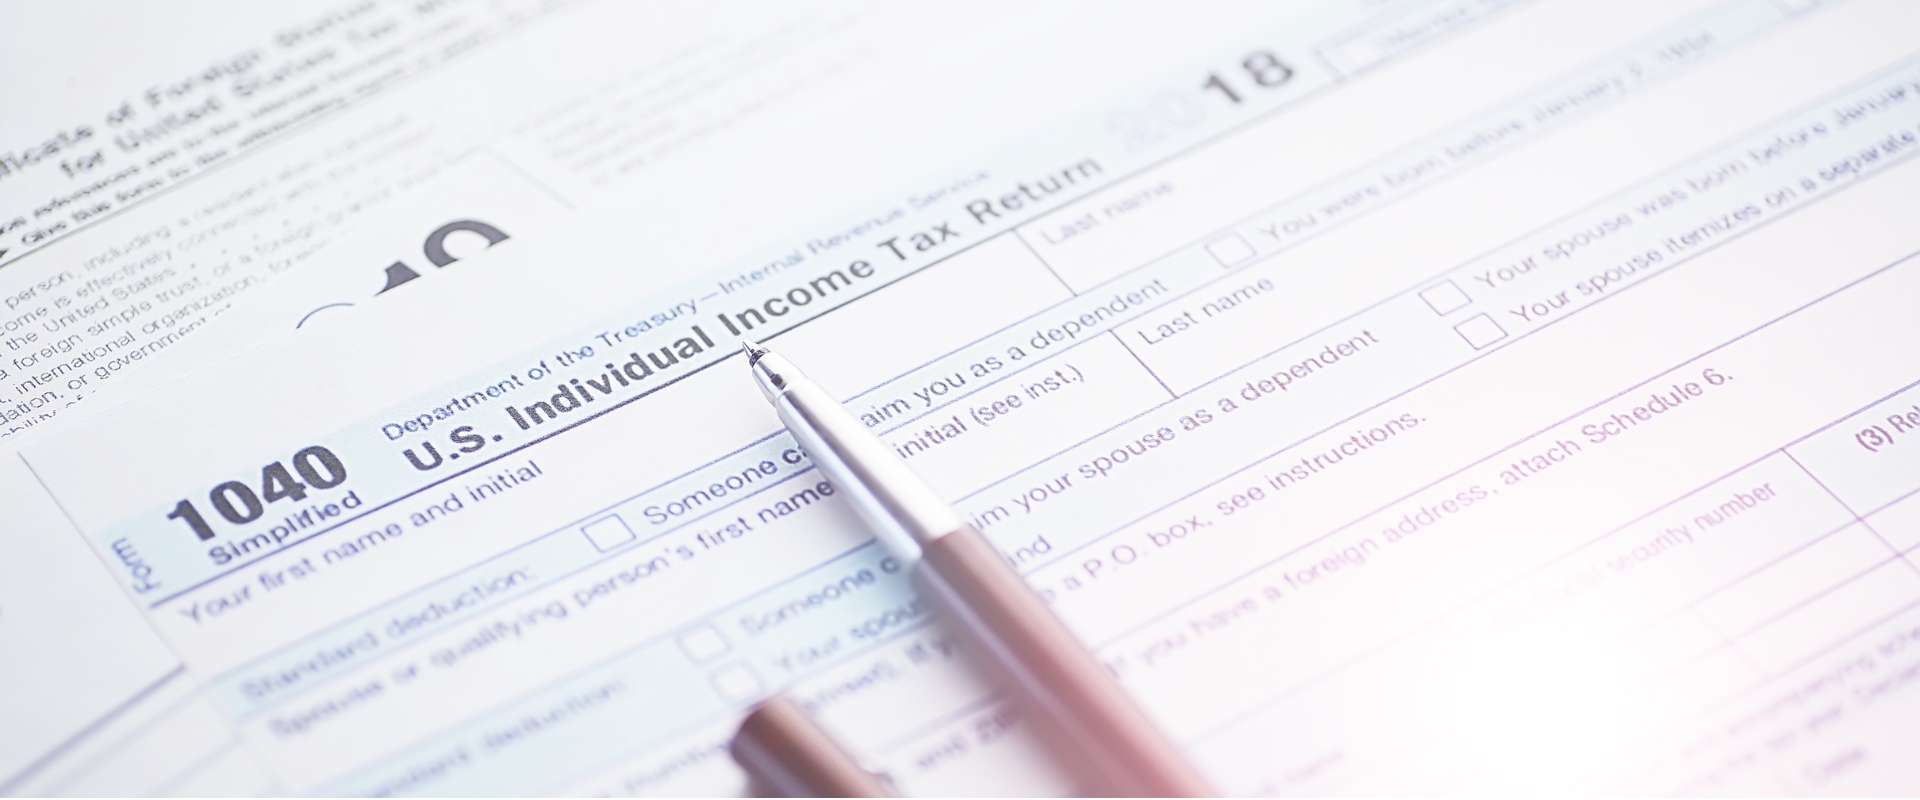 Annual and Monthly Tax Reporting, What's the Difference?